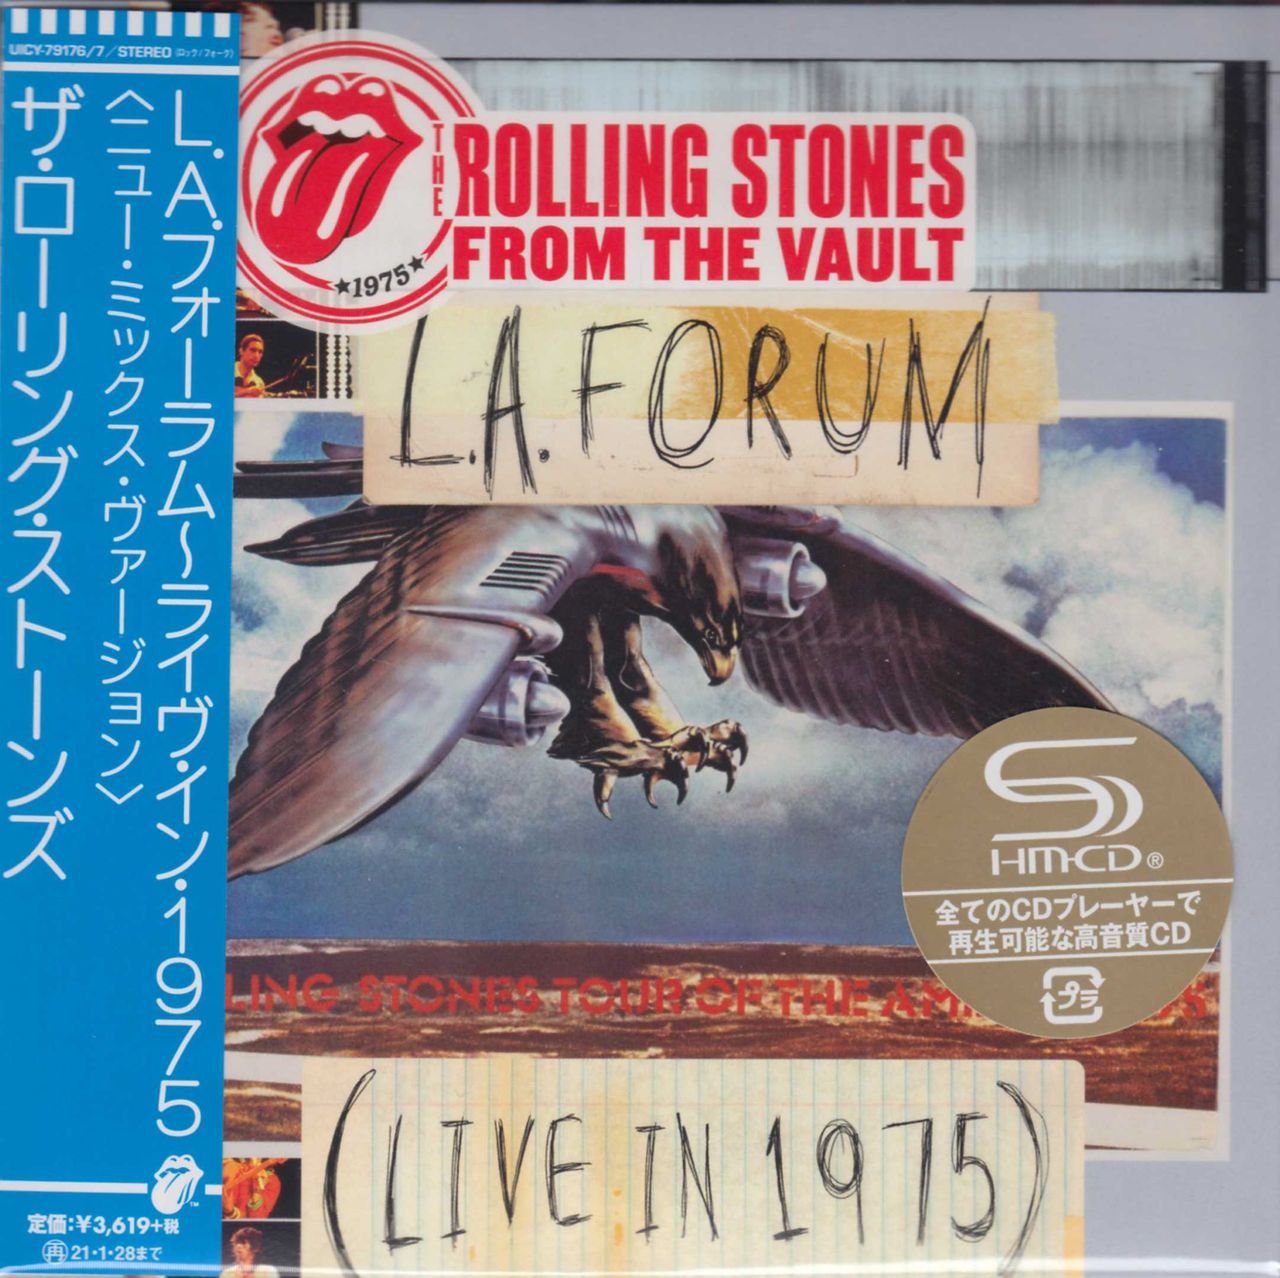 The Rolling Stones From The Vault: L.A. Forum - Live 1975 Japanese